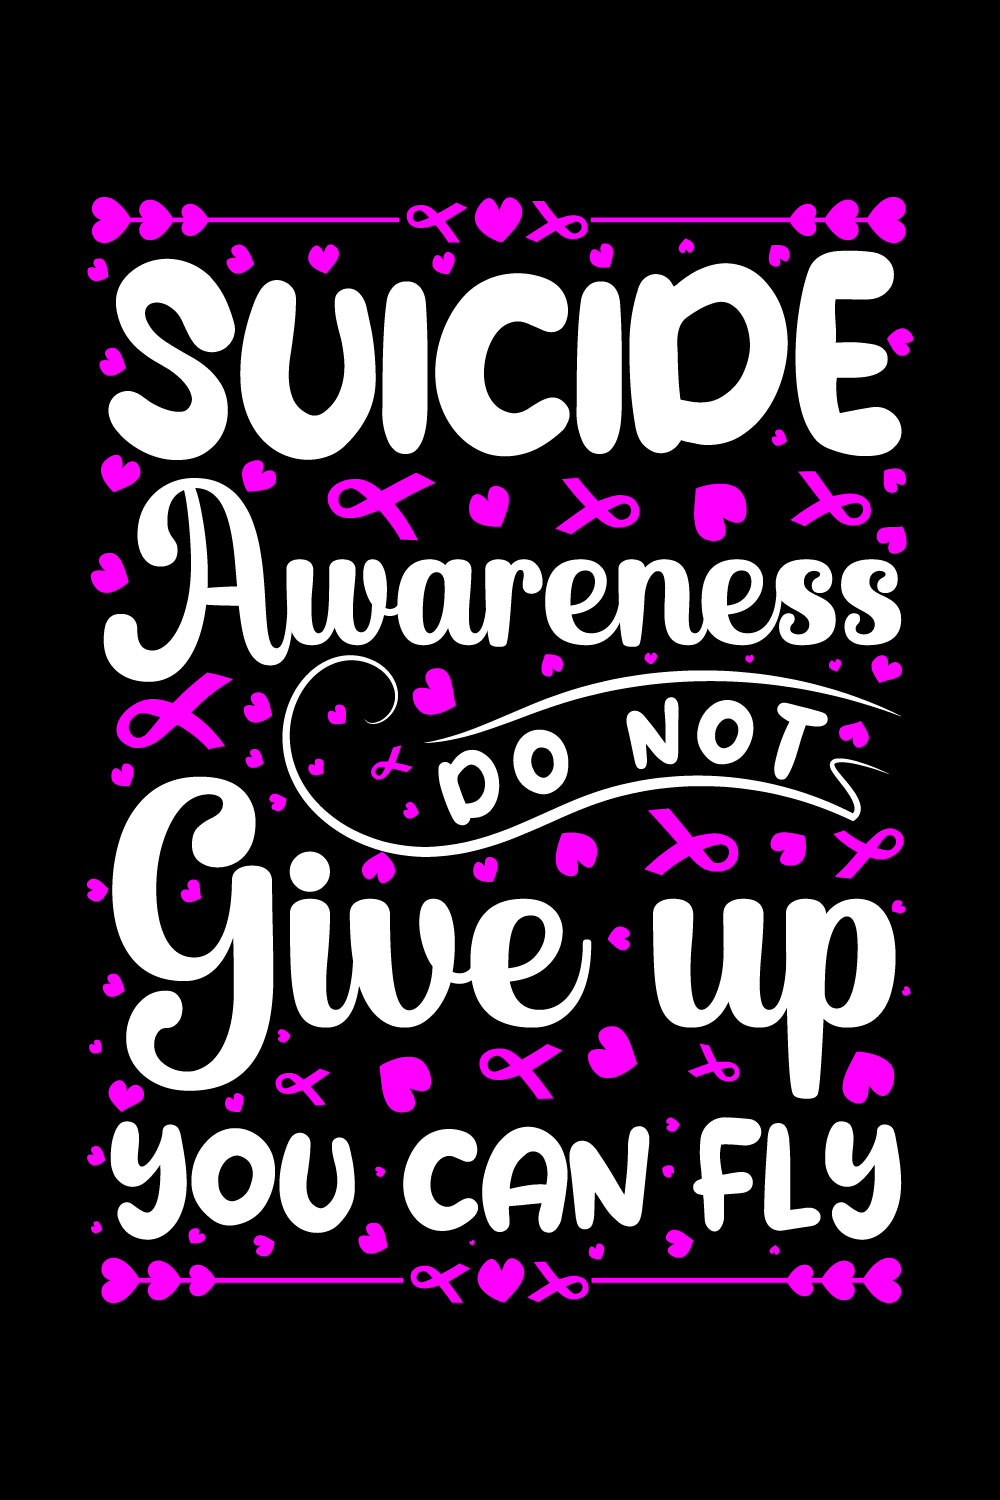 This is a Suicide awareness t-shirt design Bundle pinterest preview image.